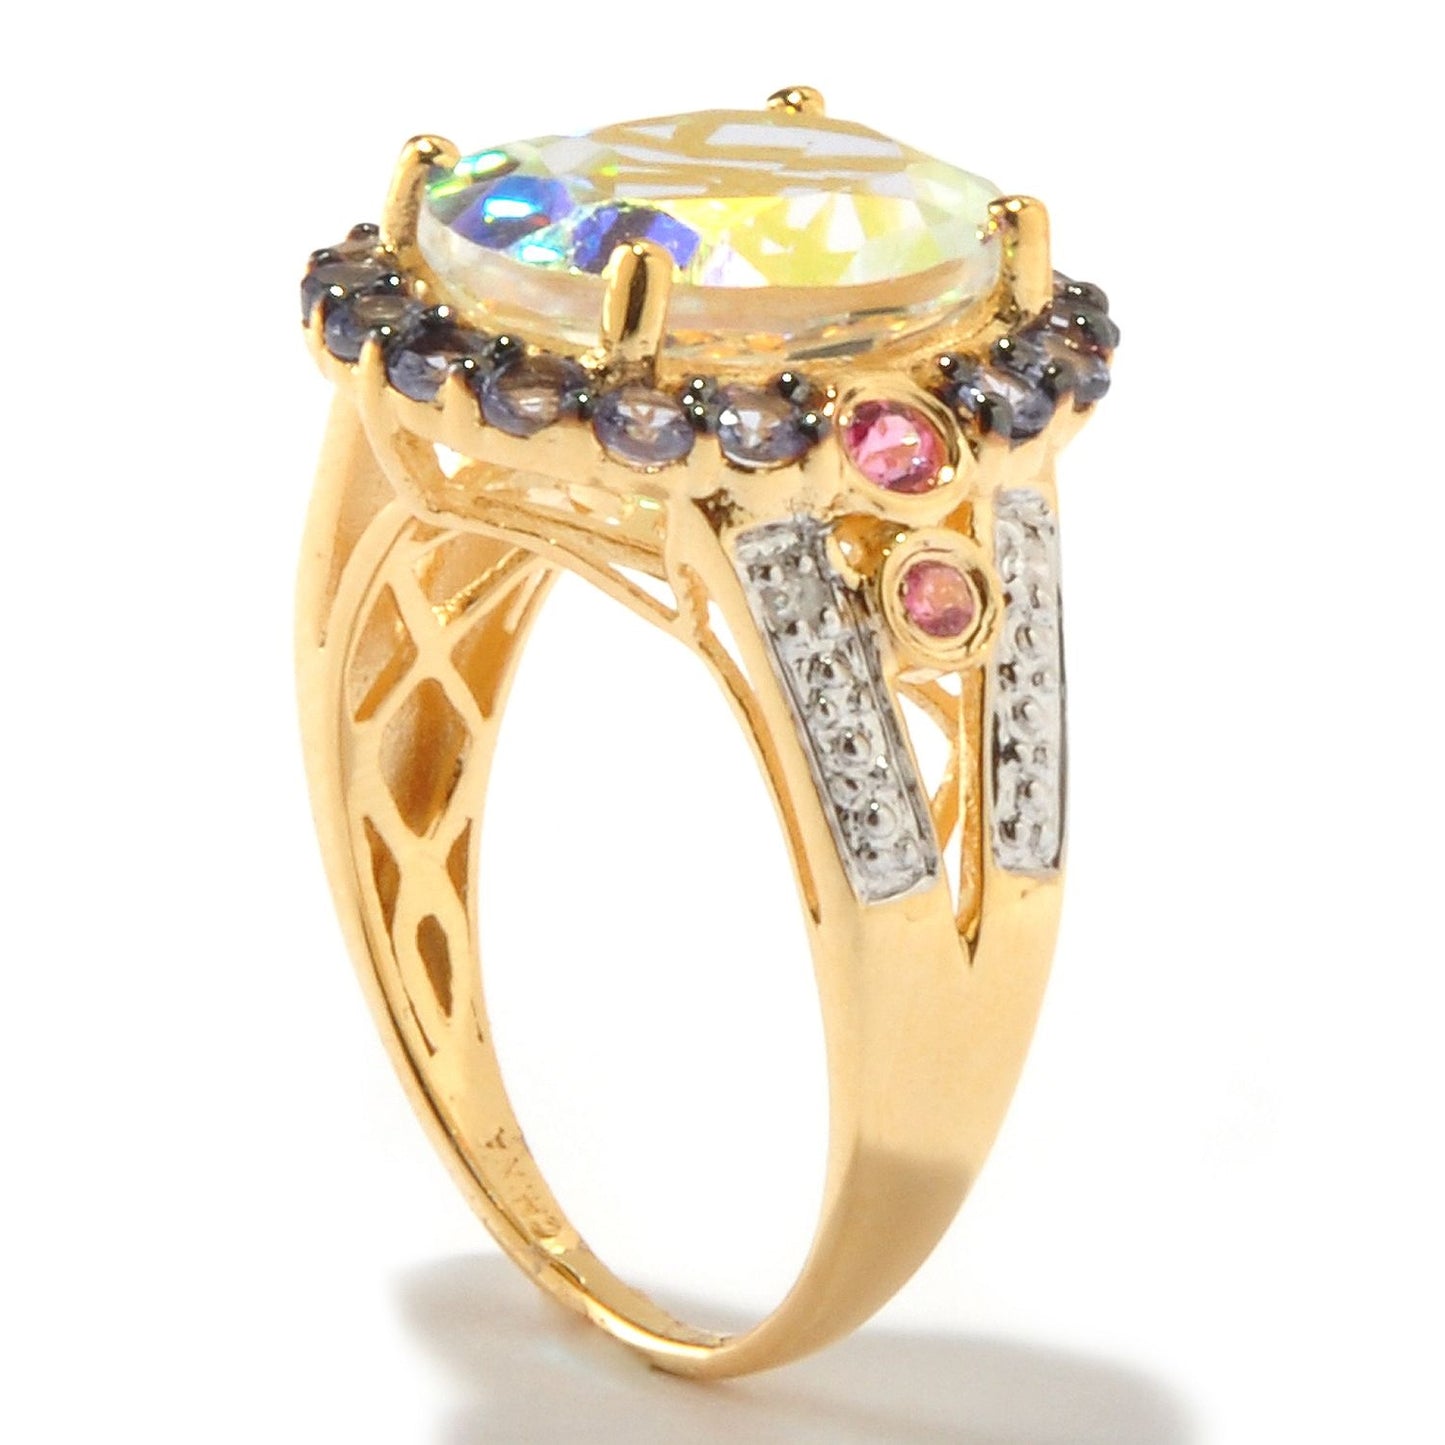 Pinctore 18K Yellow Gold Over Silver 6.55ctw Opal Topaz Cocktail Ring, Size 7